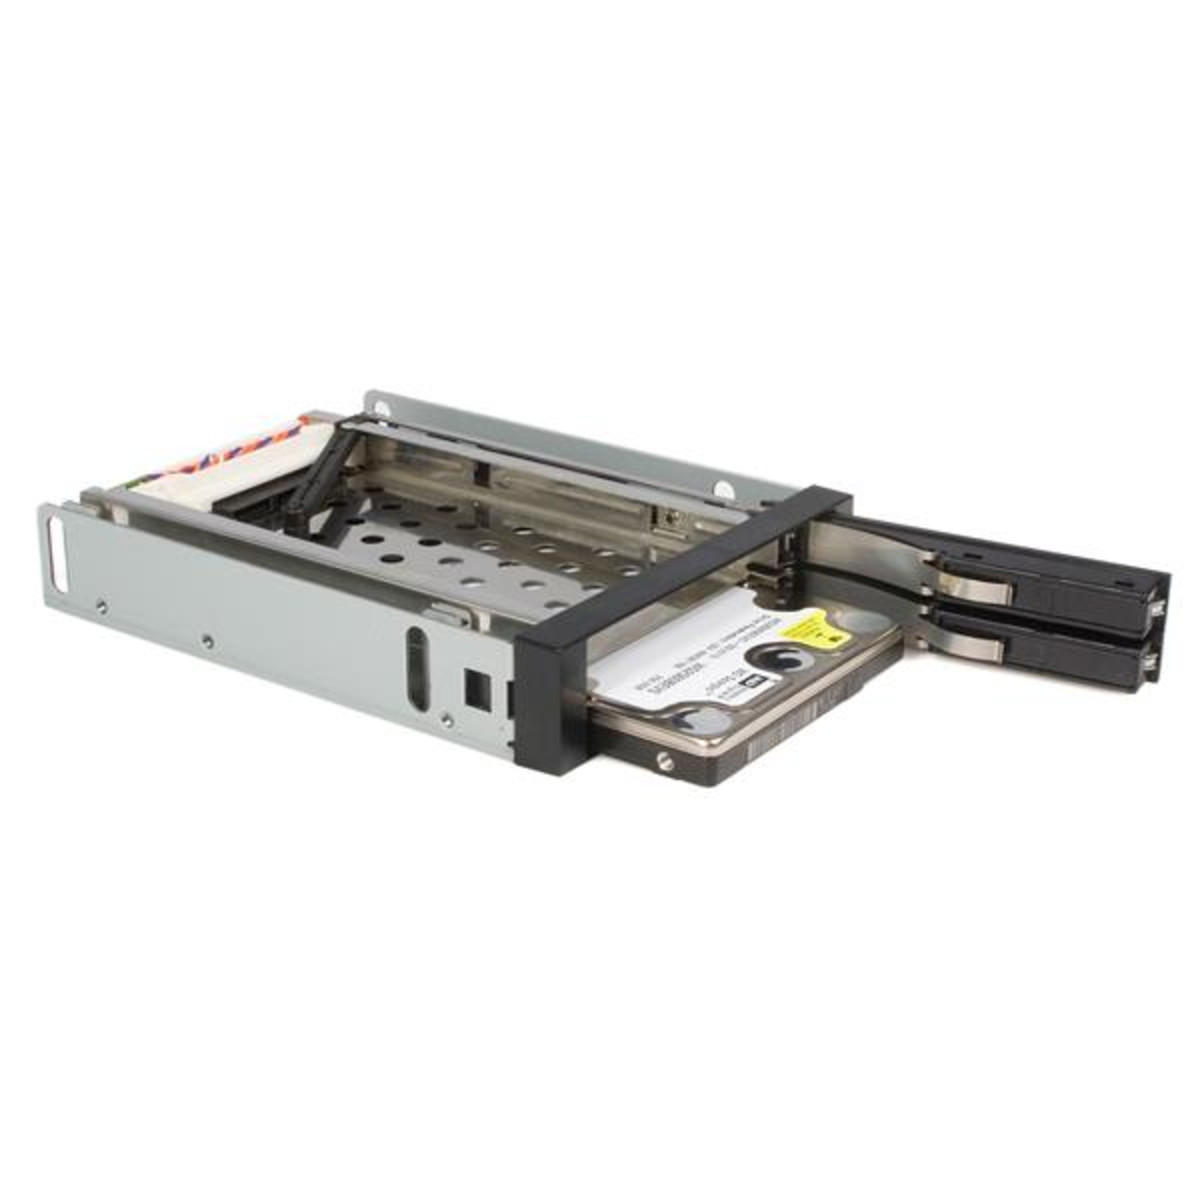 2 Drive 2.5in Trayless SATA Mobile Rack